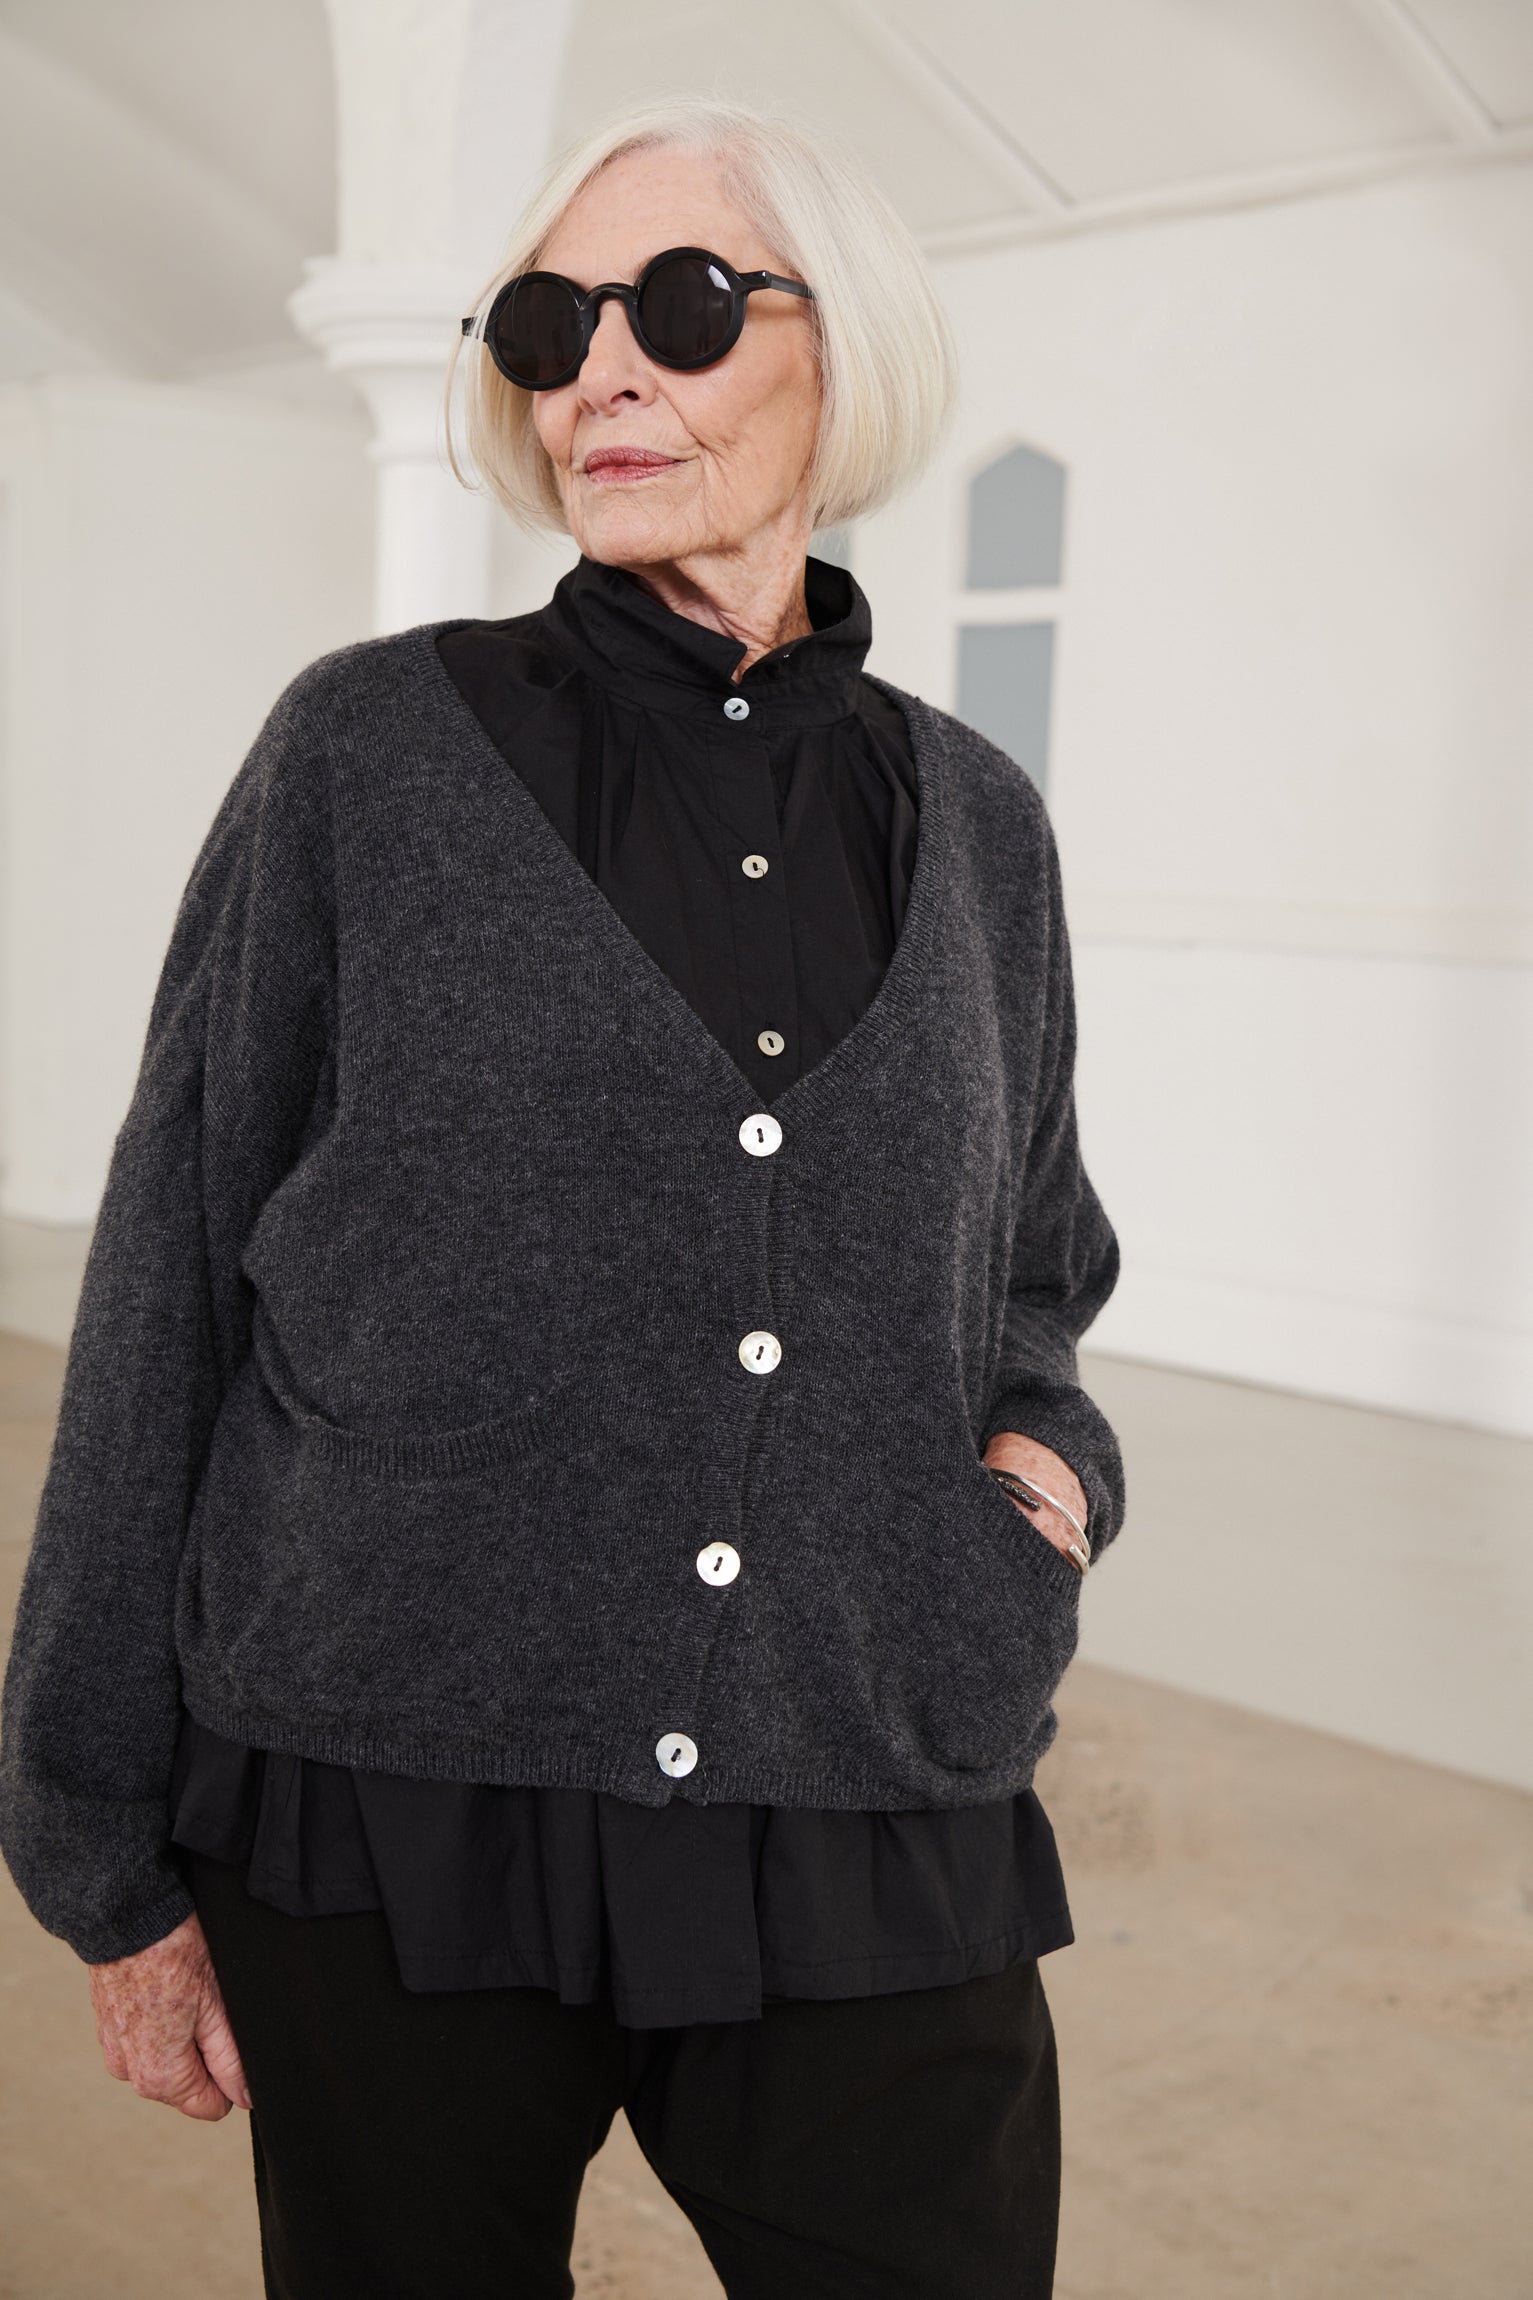 A MegbyDesign model is wearing a charcoal oversized wool cardigan with two pockets and buttons at the front